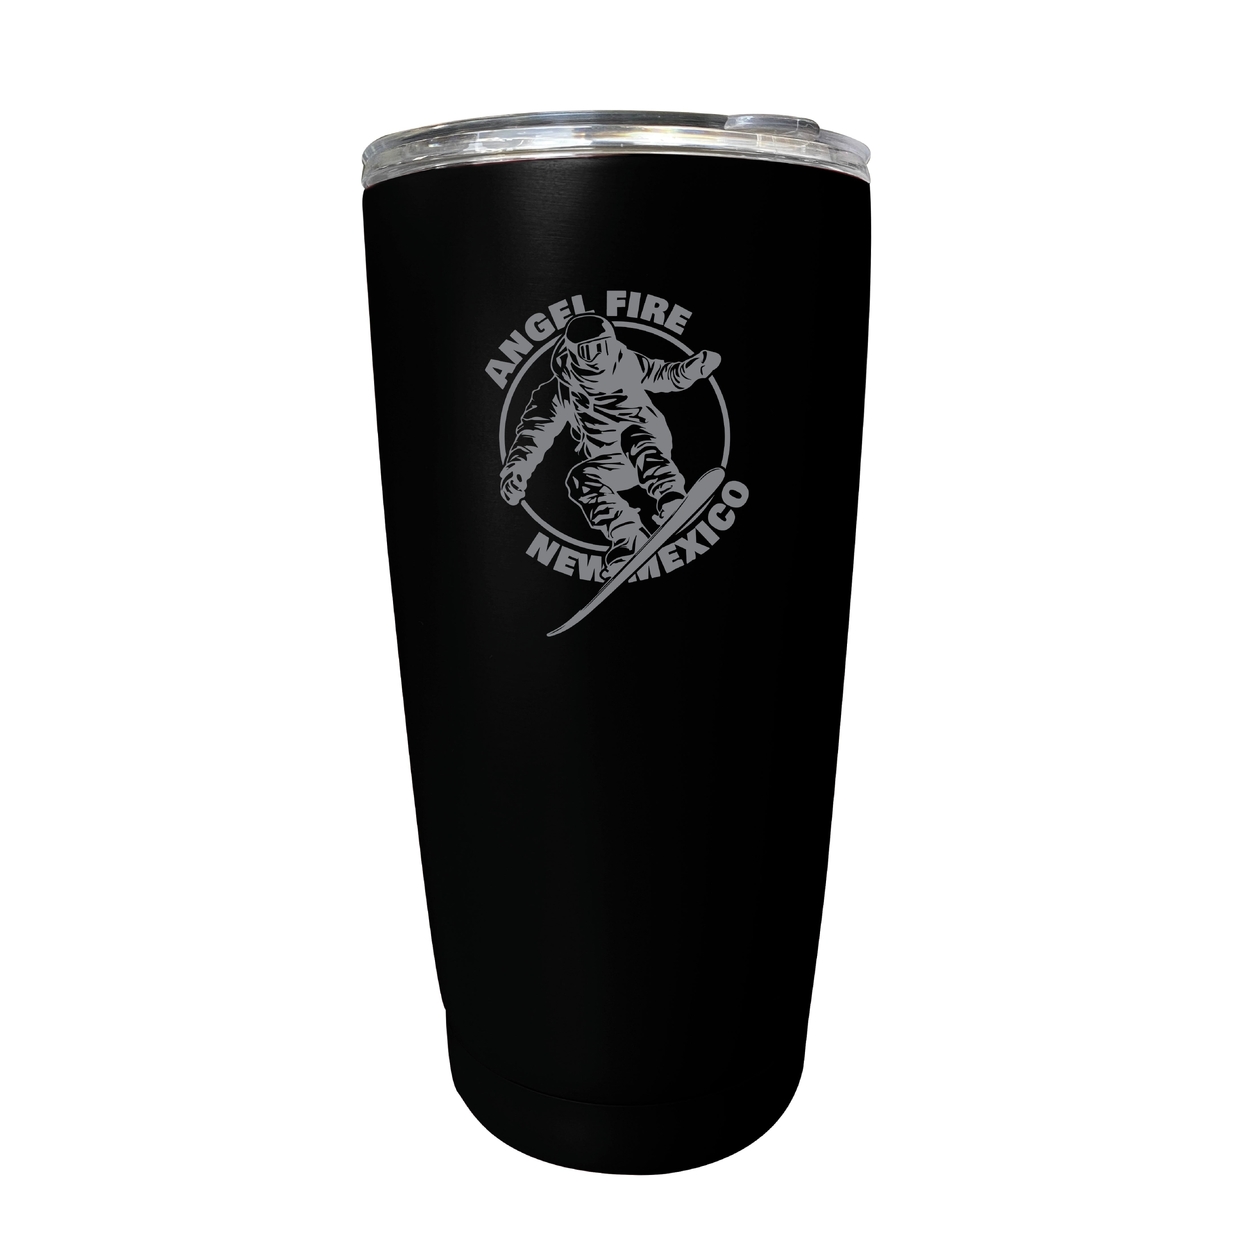 Angel Fire New Mexico Souvenir 16 Oz Engraved Stainless Steel Insulated Tumbler - Black,,4-Pack